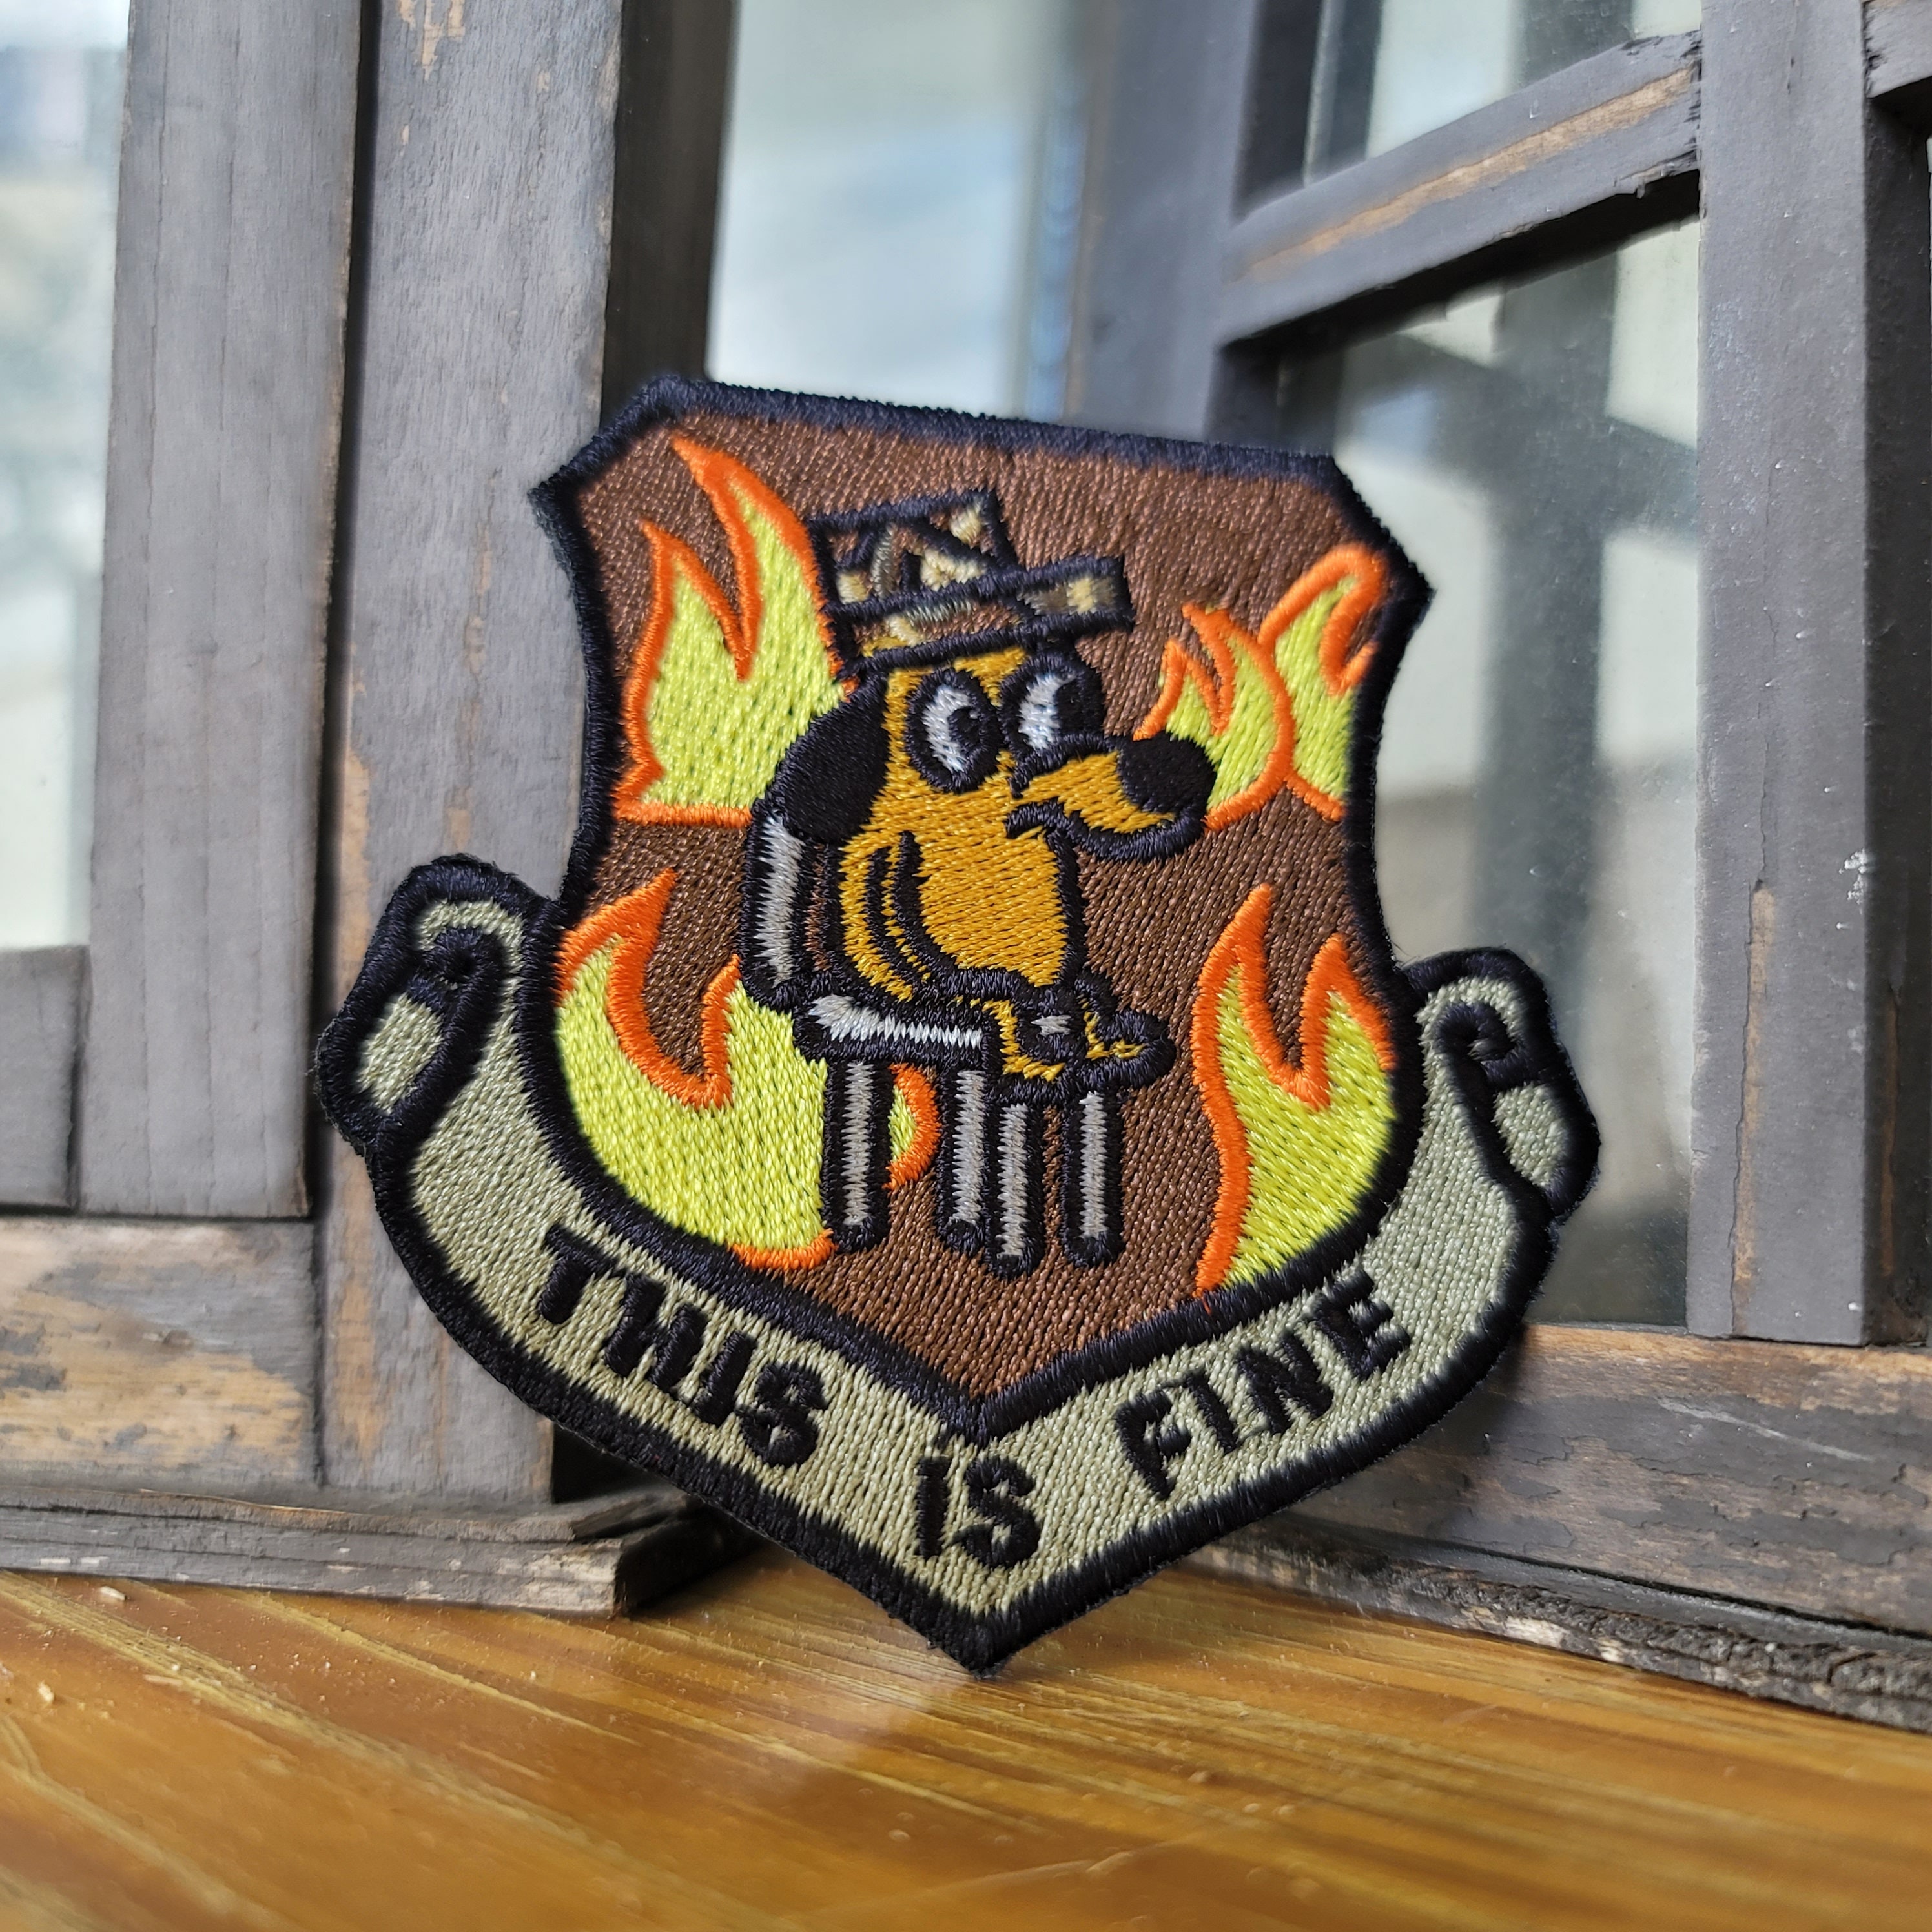 FAFO F**k Around and Find Out MORALE PATCH, GLOW DARK Hook Backing 3x2